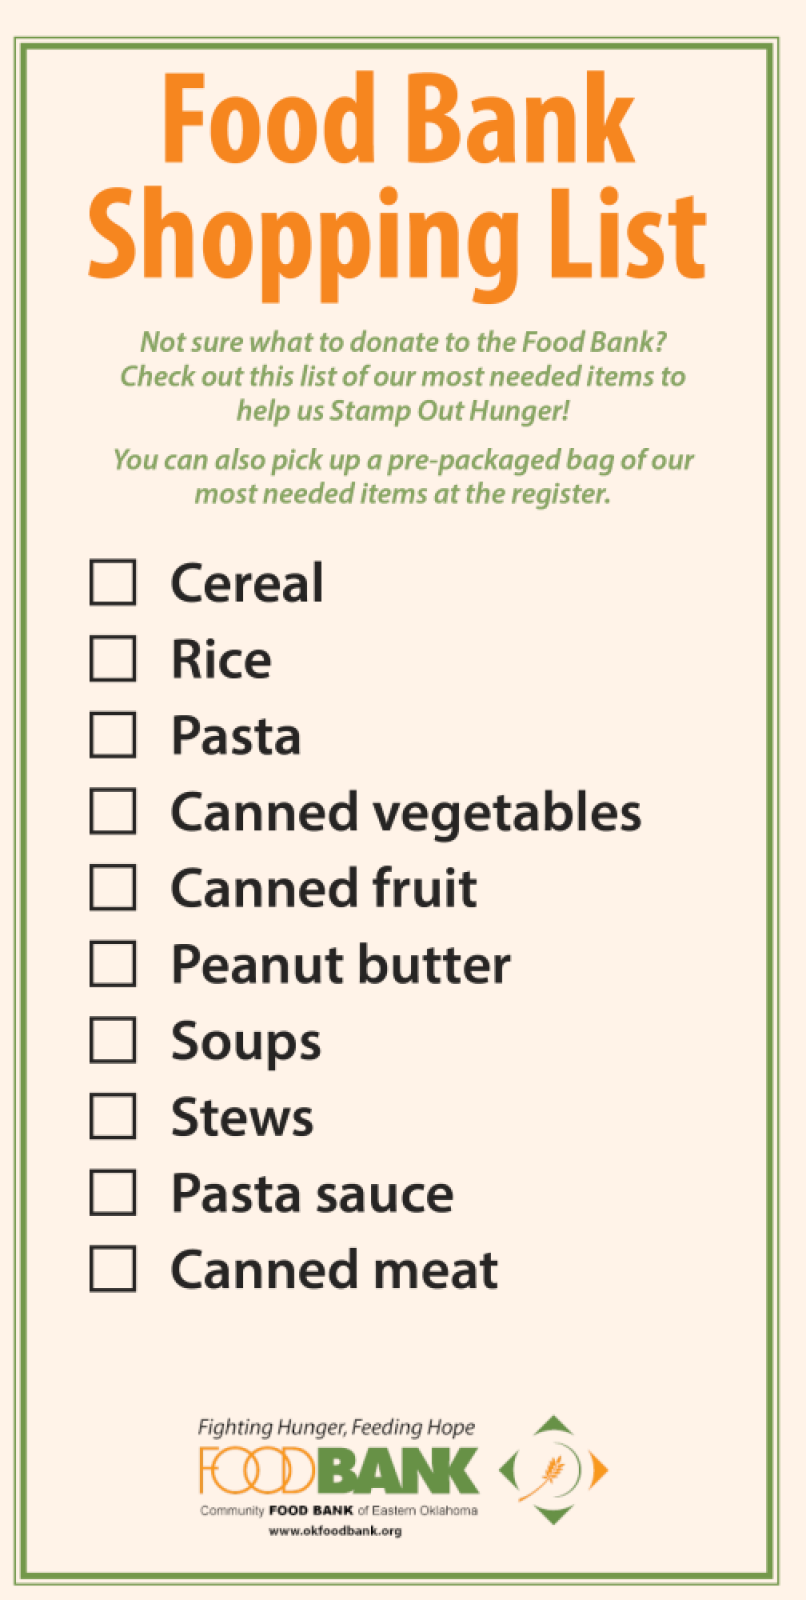 https://rhs.sd38.bc.ca/files/rhs/styles/3x_large/public/2021-10/Food-Bank-Shopping-List-Most-needed-items-1.png?itok=ILPZCxVY